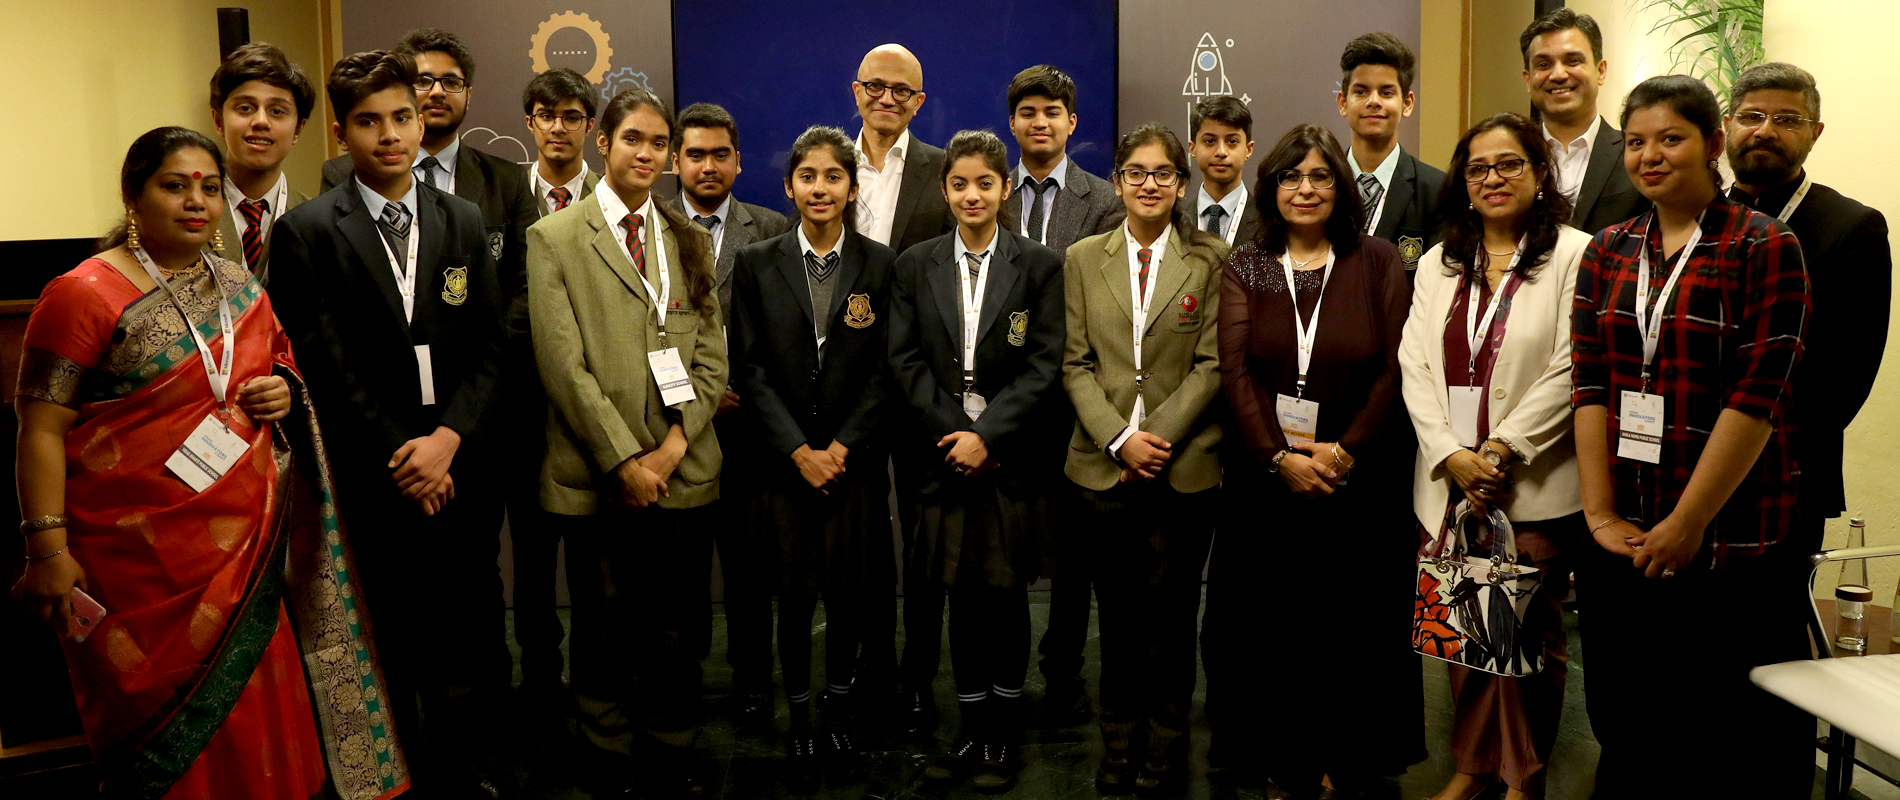 Students and educators from across India meet Microsoft CEO Satya Nadella to showcase how they are using technology to transform learning